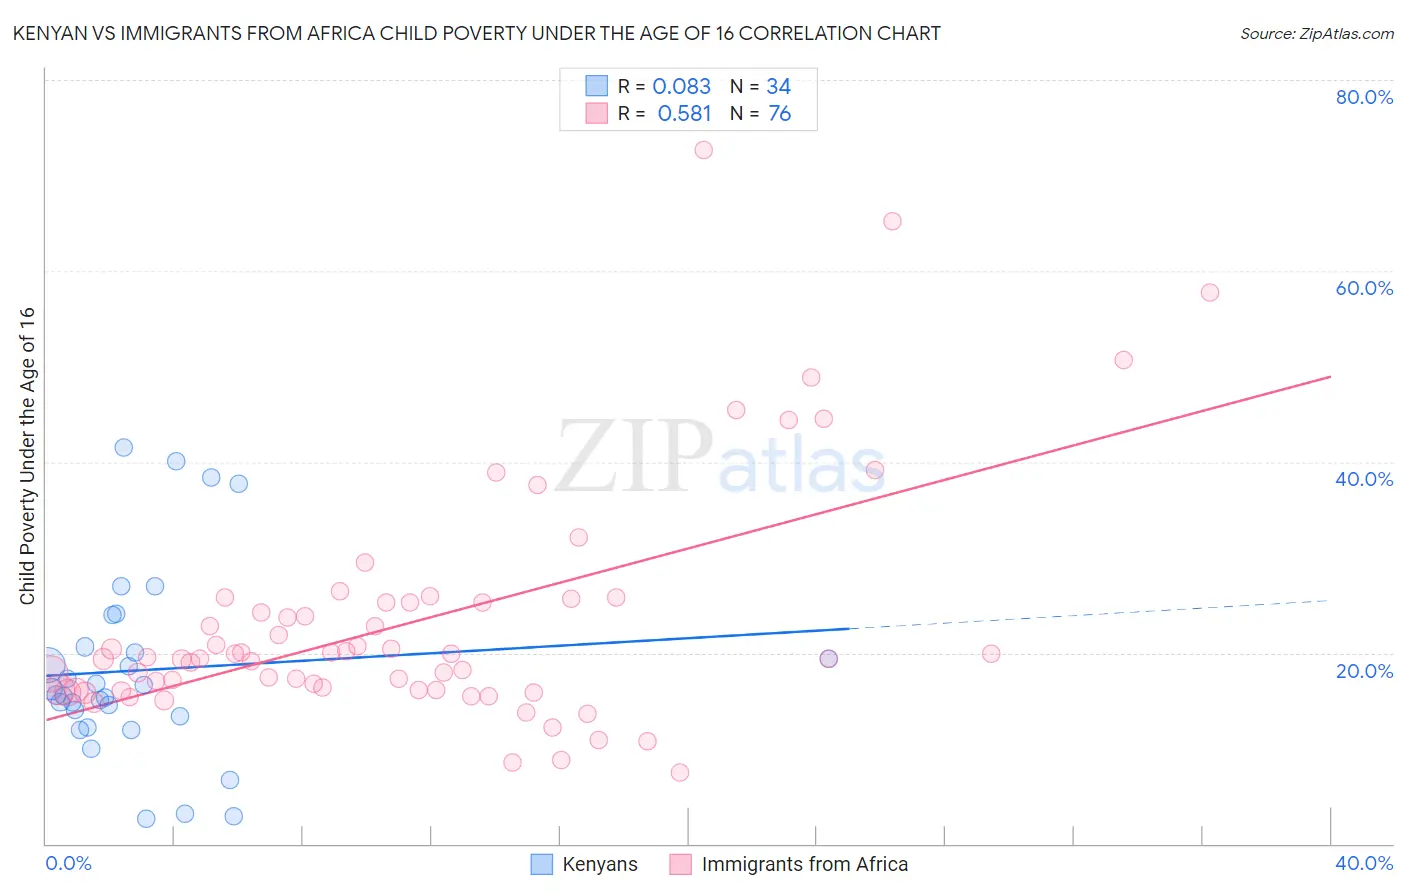 Kenyan vs Immigrants from Africa Child Poverty Under the Age of 16